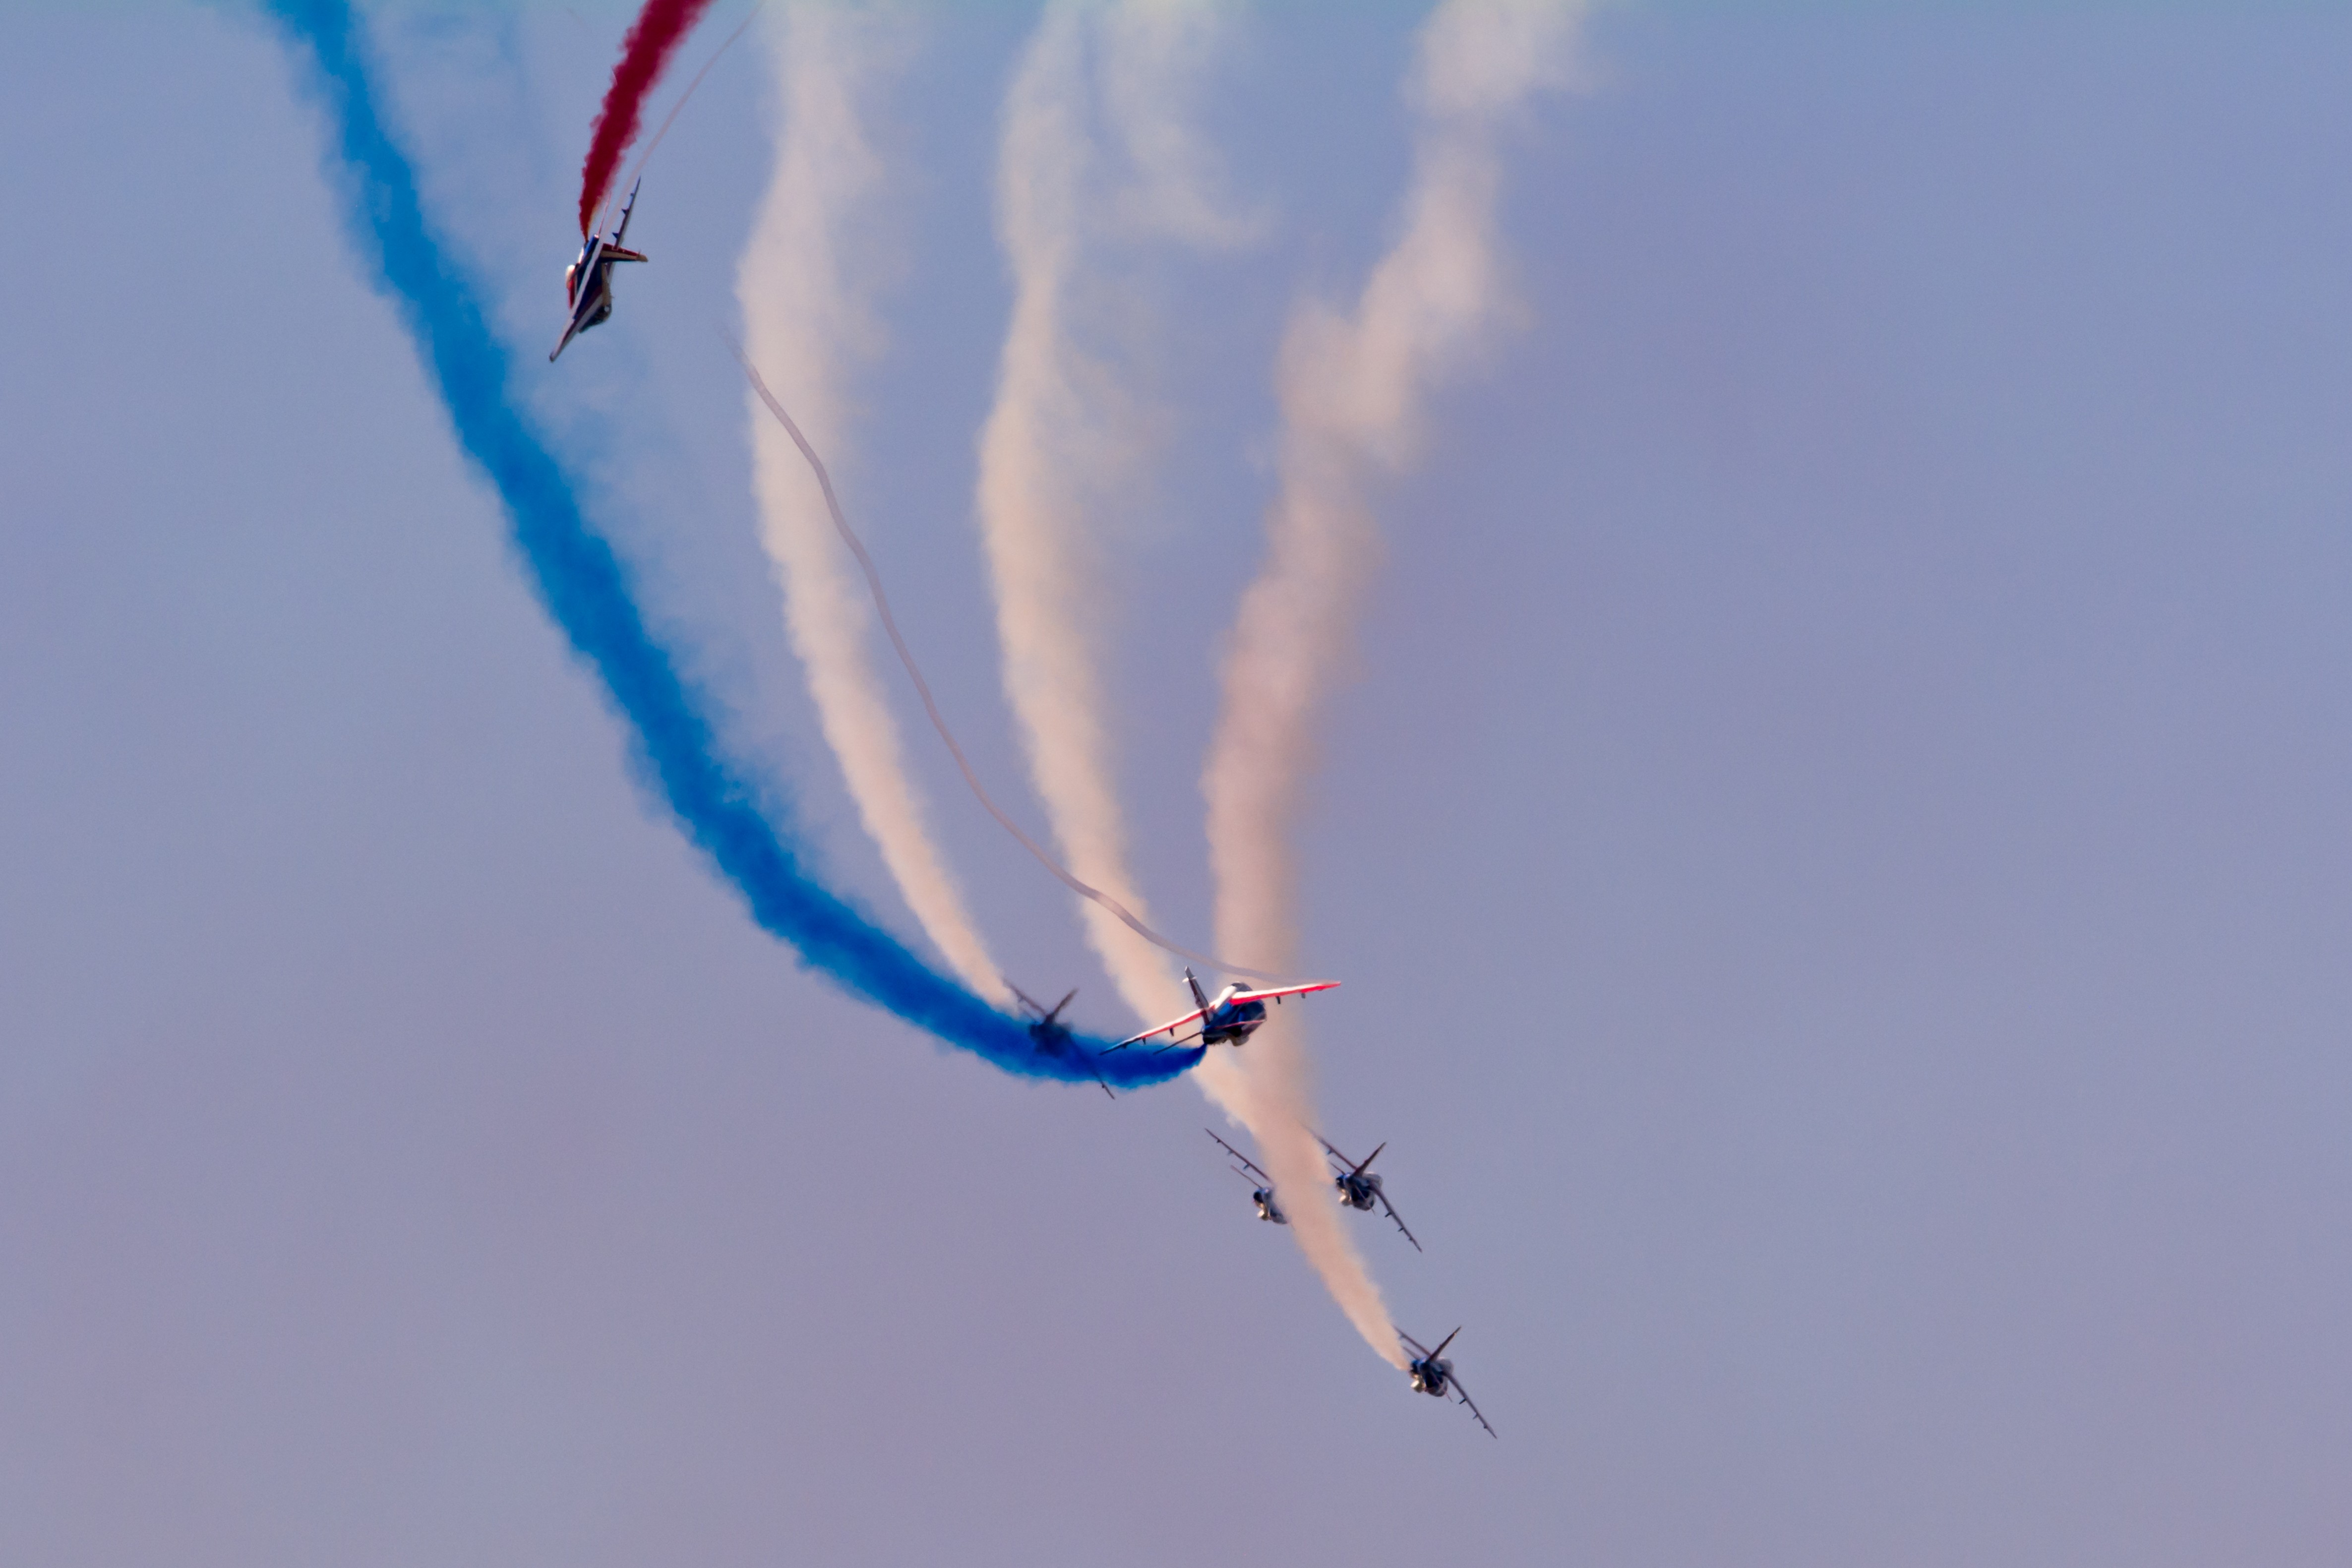 General 4743x3162 airplane airshows Patrouille de France blue white red smoke aircraft military aircraft vehicle military vehicle colored smoke aerobatic team